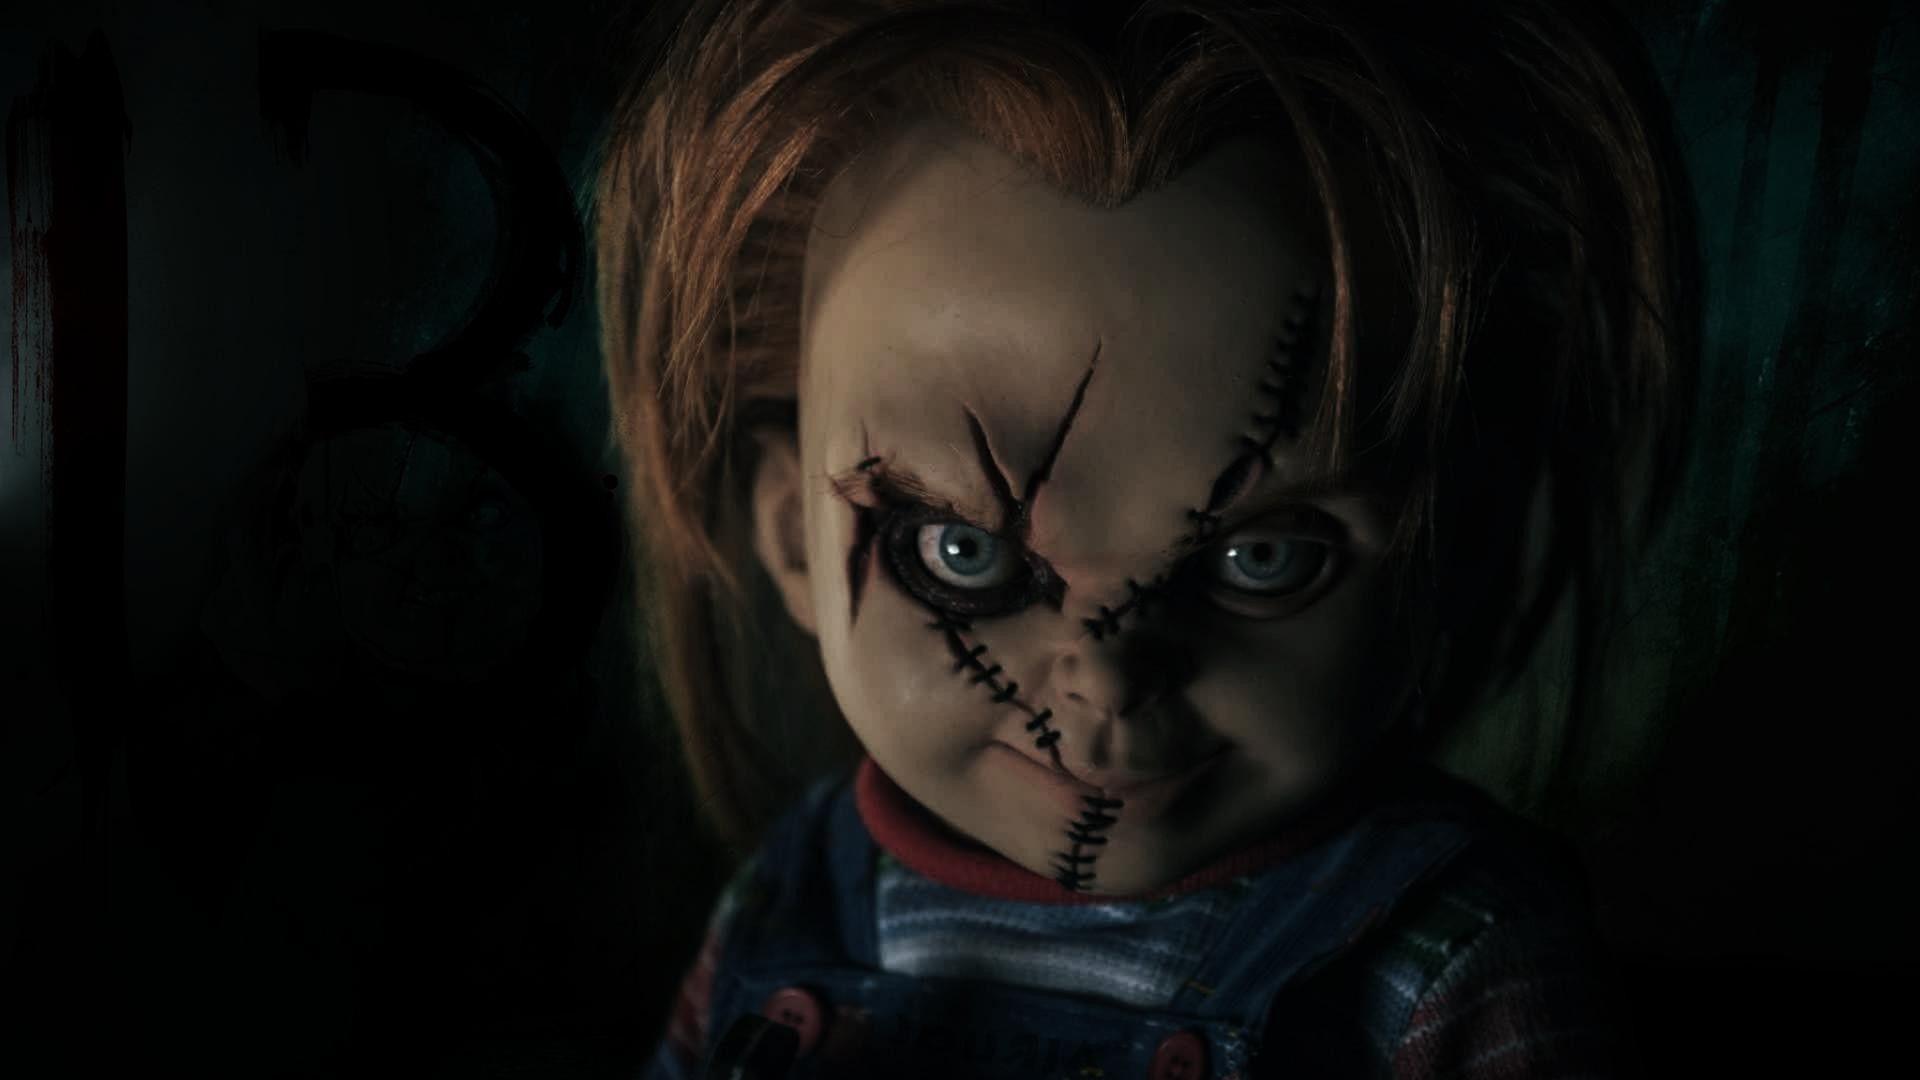 image For > Chucky Doll Wallpaper con imágenes